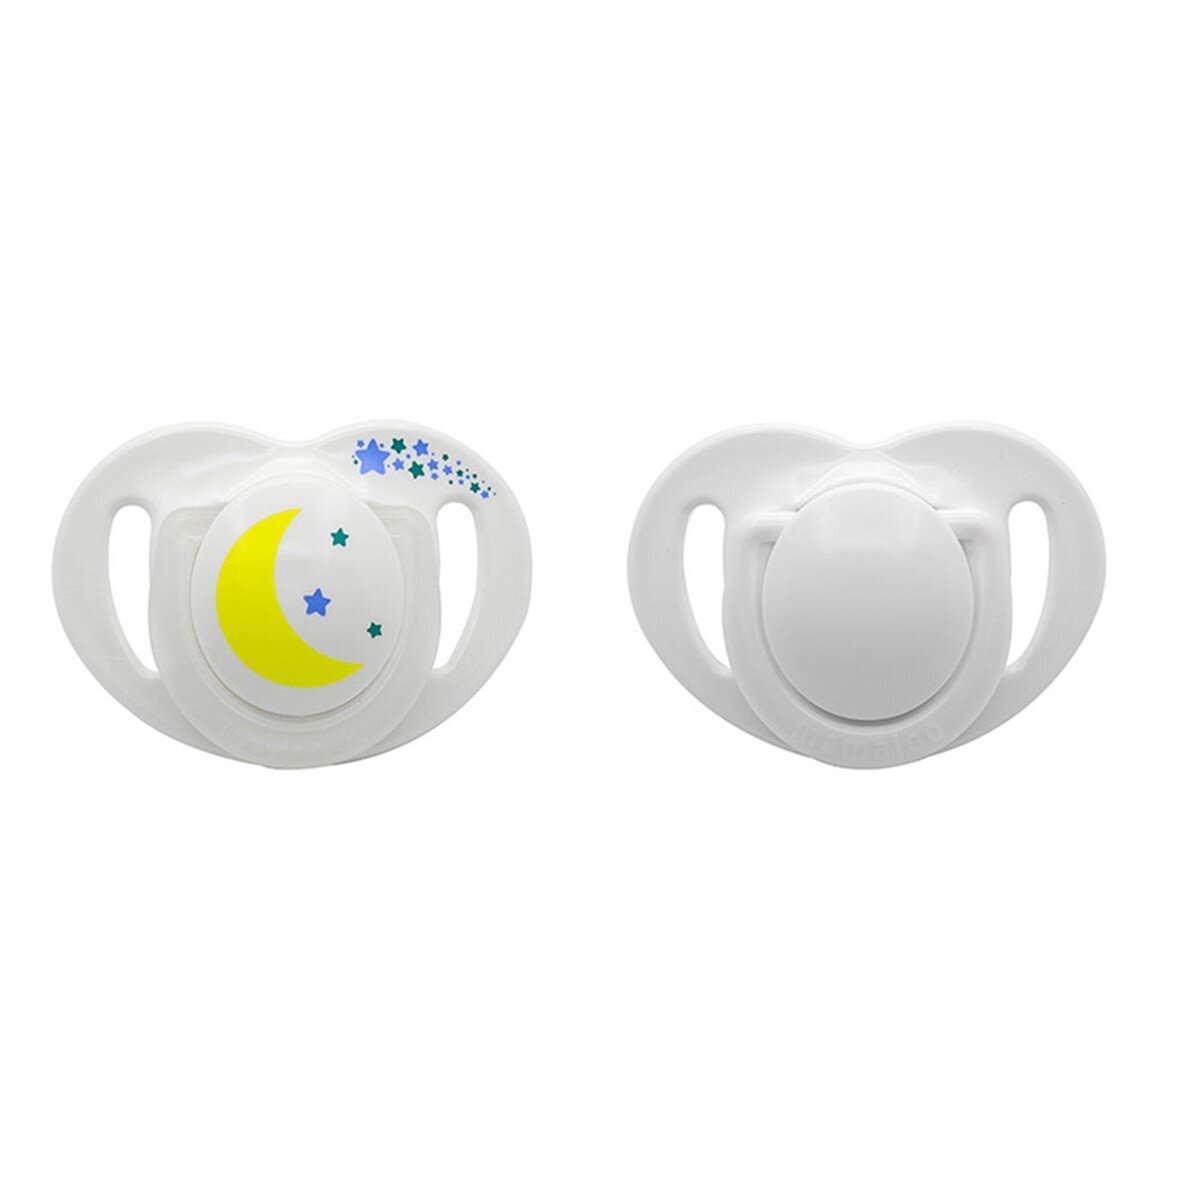 Mamajoo Silicone Orthodontic Soother (Pack of 2)